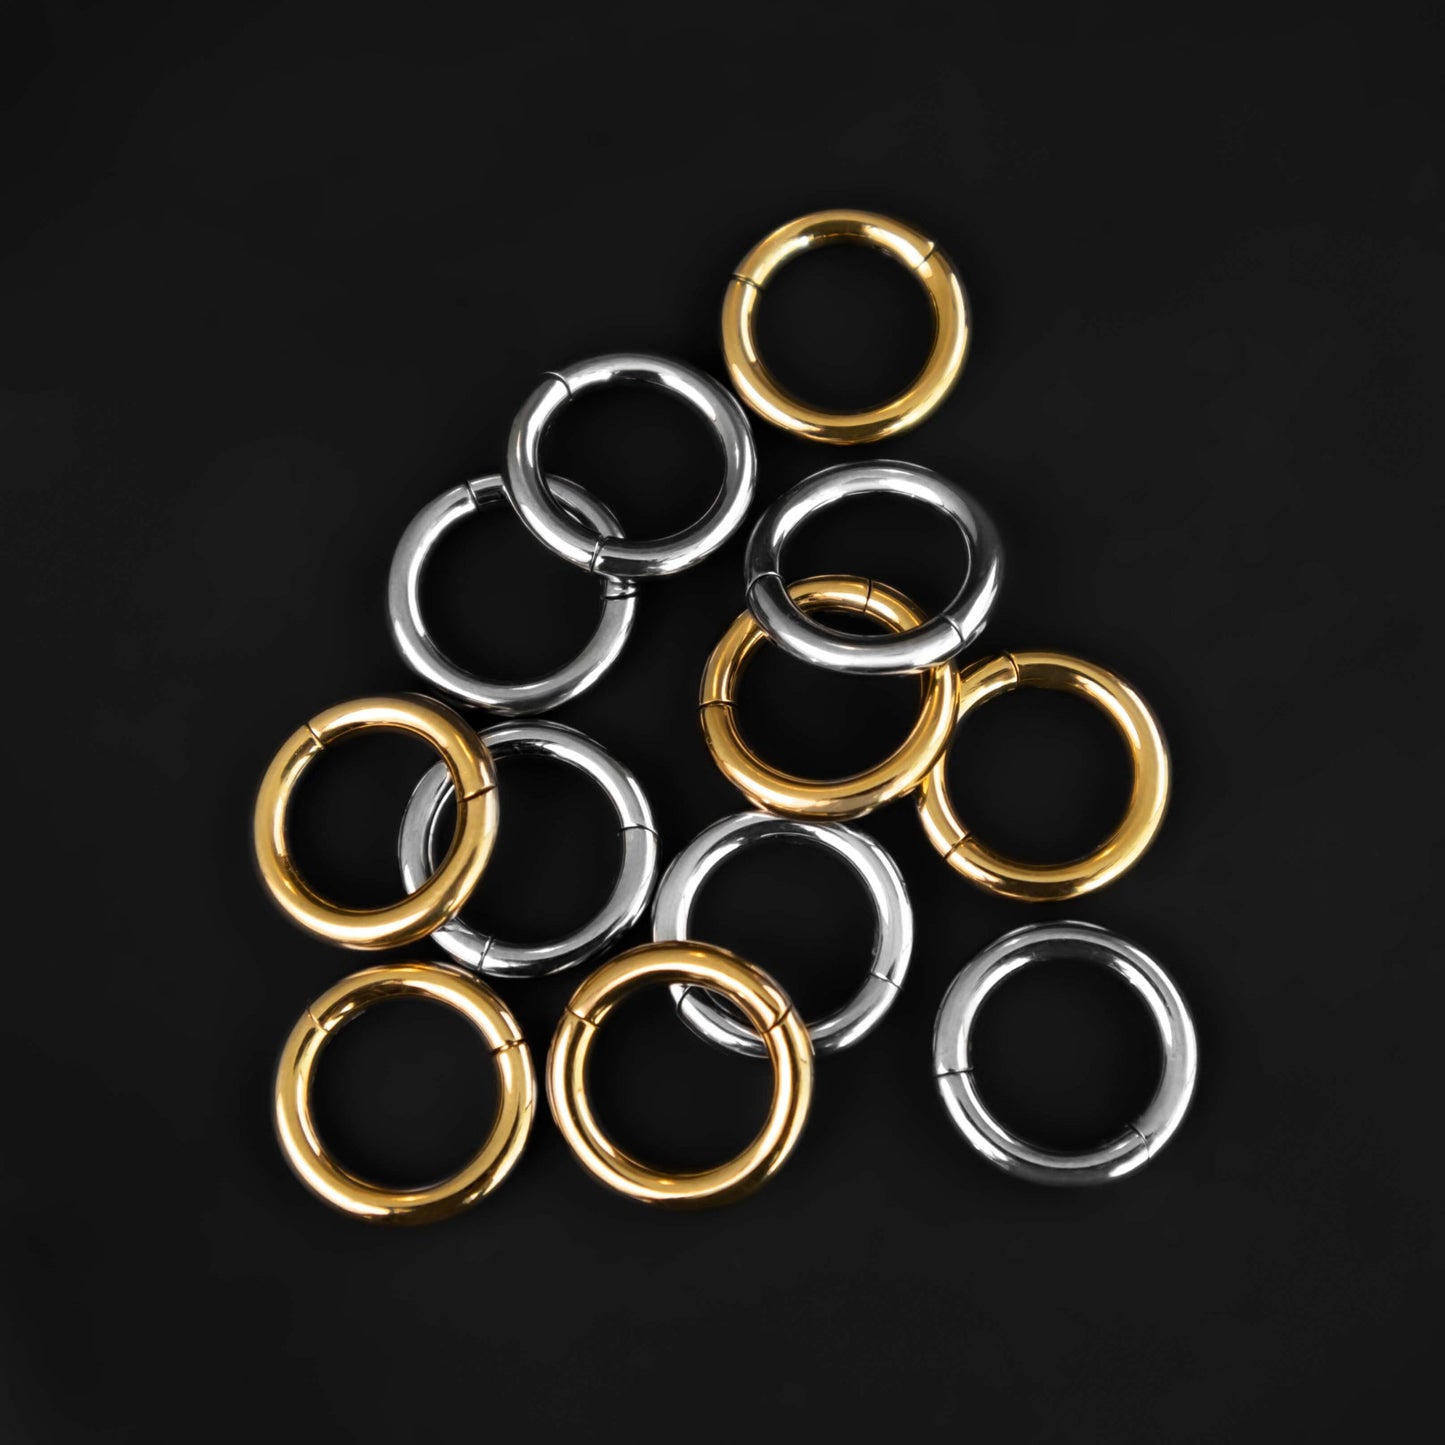 Colossal Ring Stacks In Stainless Steel - Ring Stacks - Ask and Embla